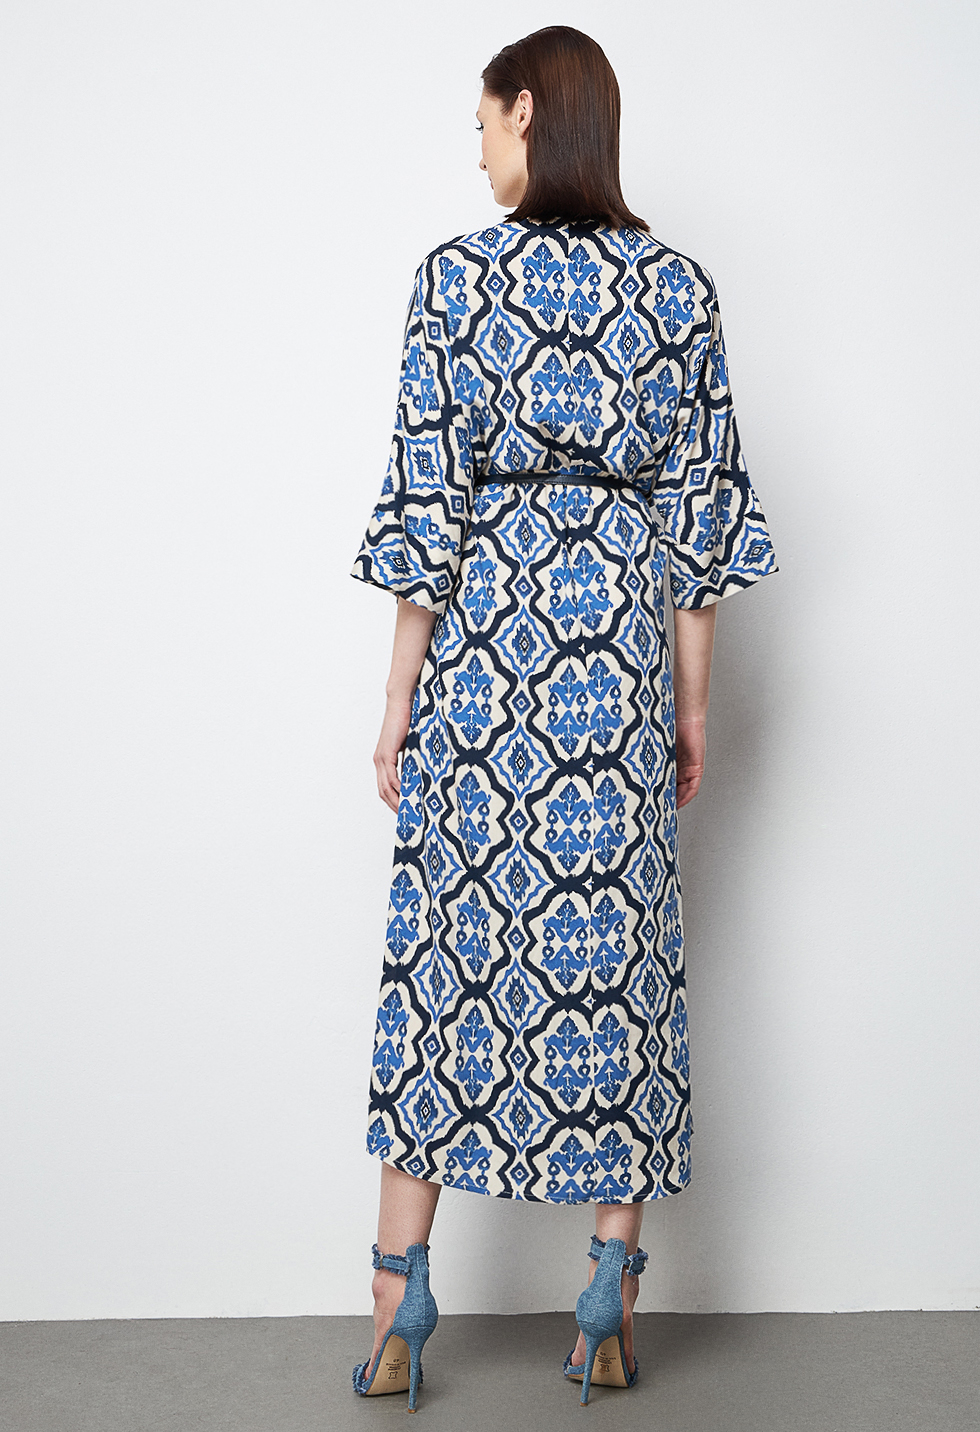 Dress with a loose fit in a printed pattern